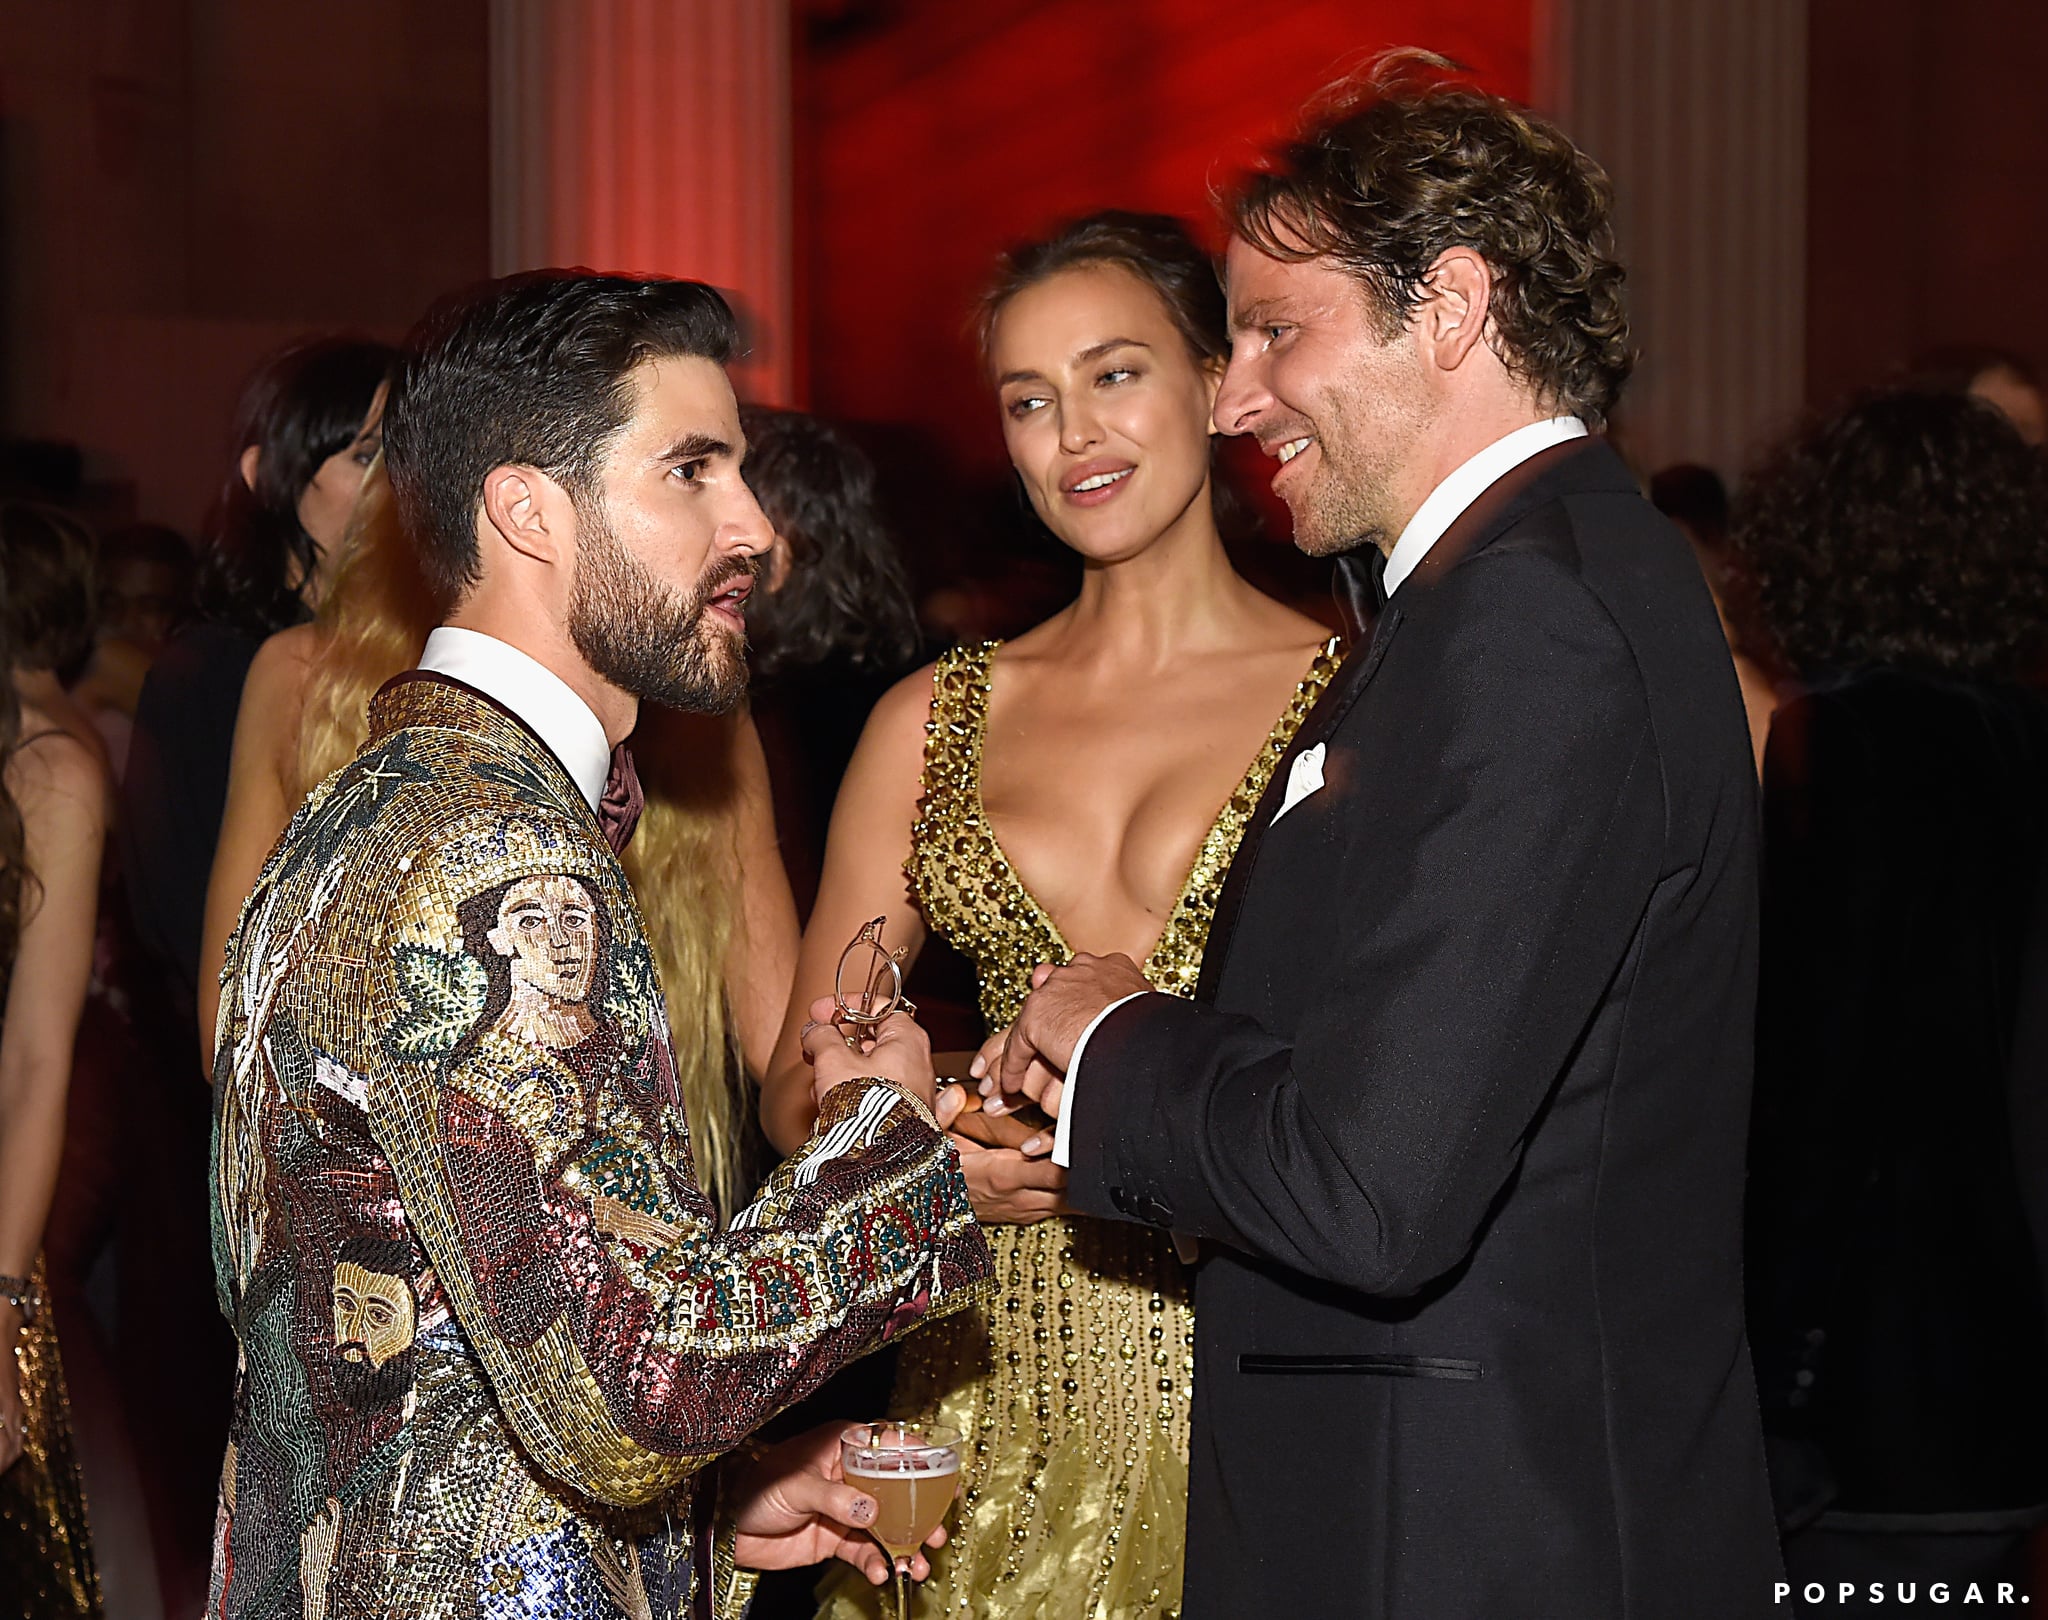 Pictured: Darren Criss, Irina Shayk and Bradley Cooper, 100+ Met Gala  Pictures That Will Put You in the Middle of All the Magic